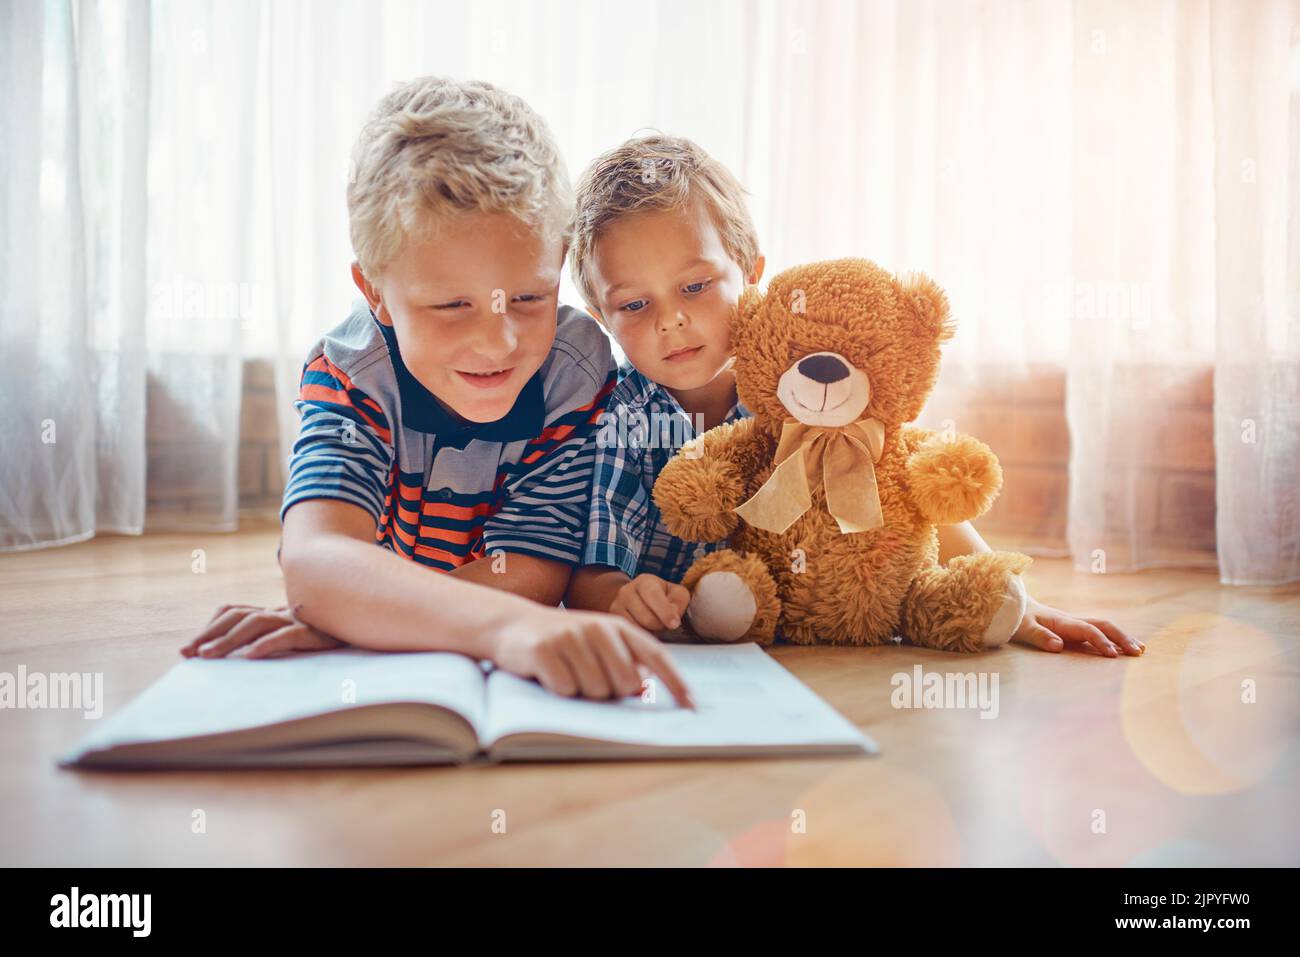 Hes such a good big brother. a boy reading to his younger brother. Stock Photo